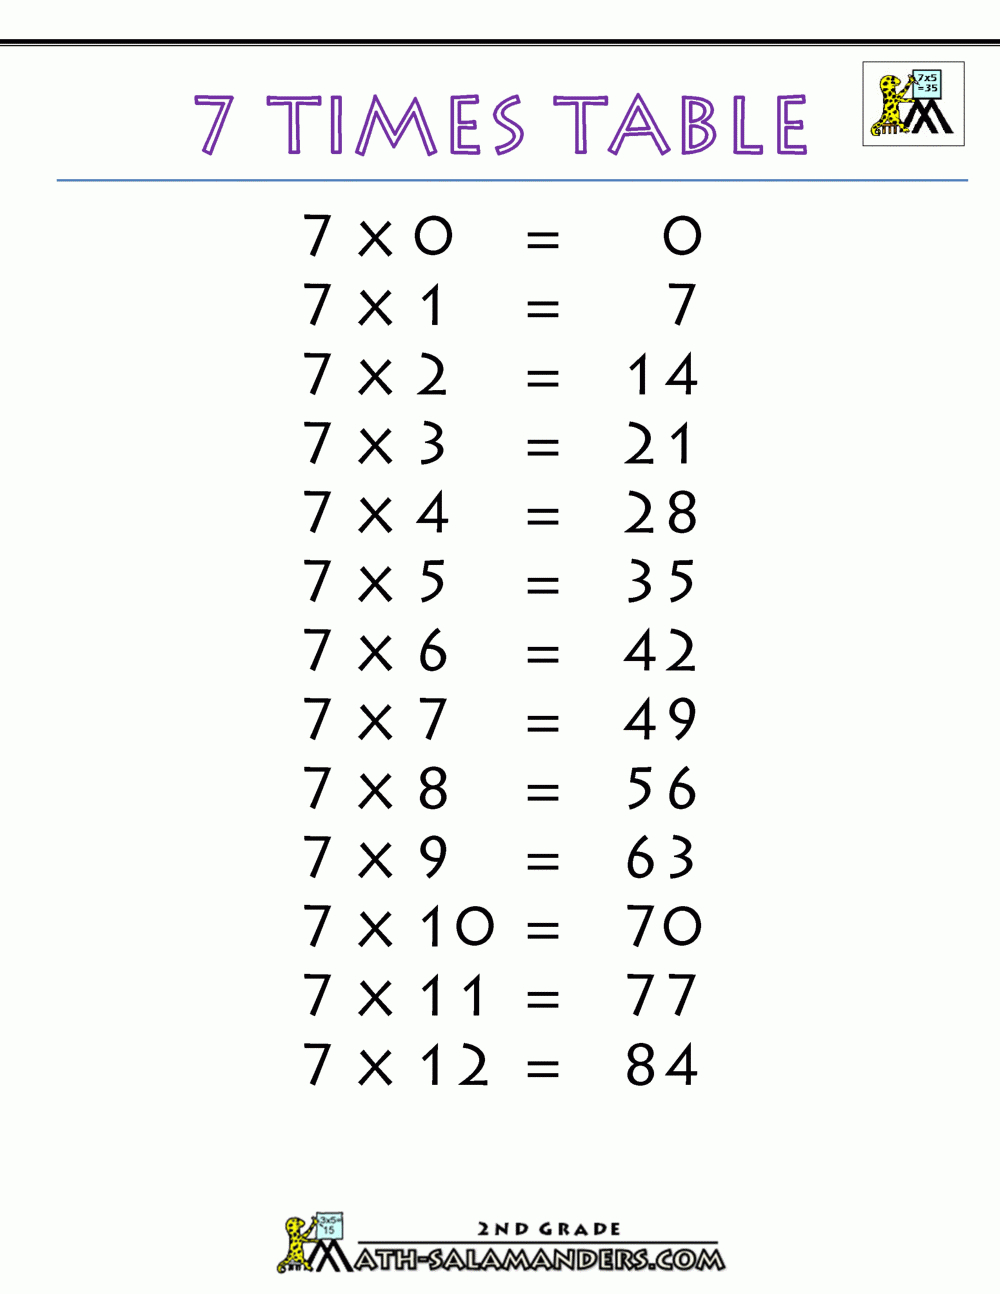 7 Times Table for Printable Multiplication Table 7